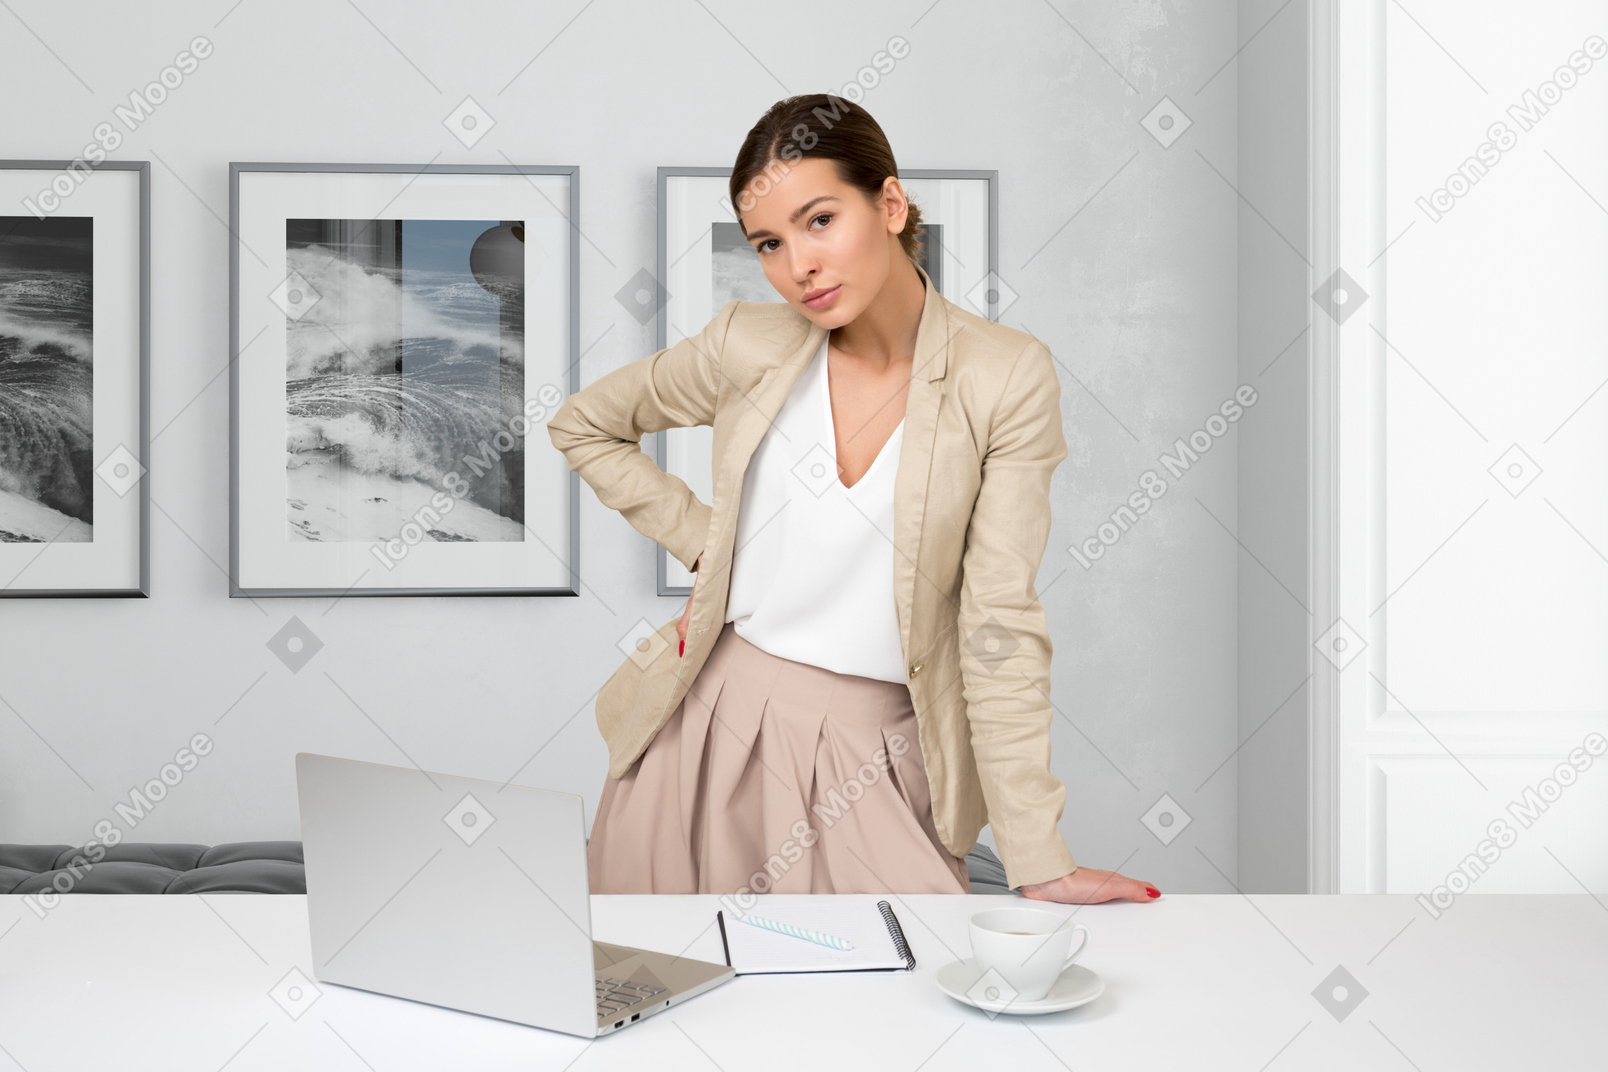 A woman standing in front of a laptop computer